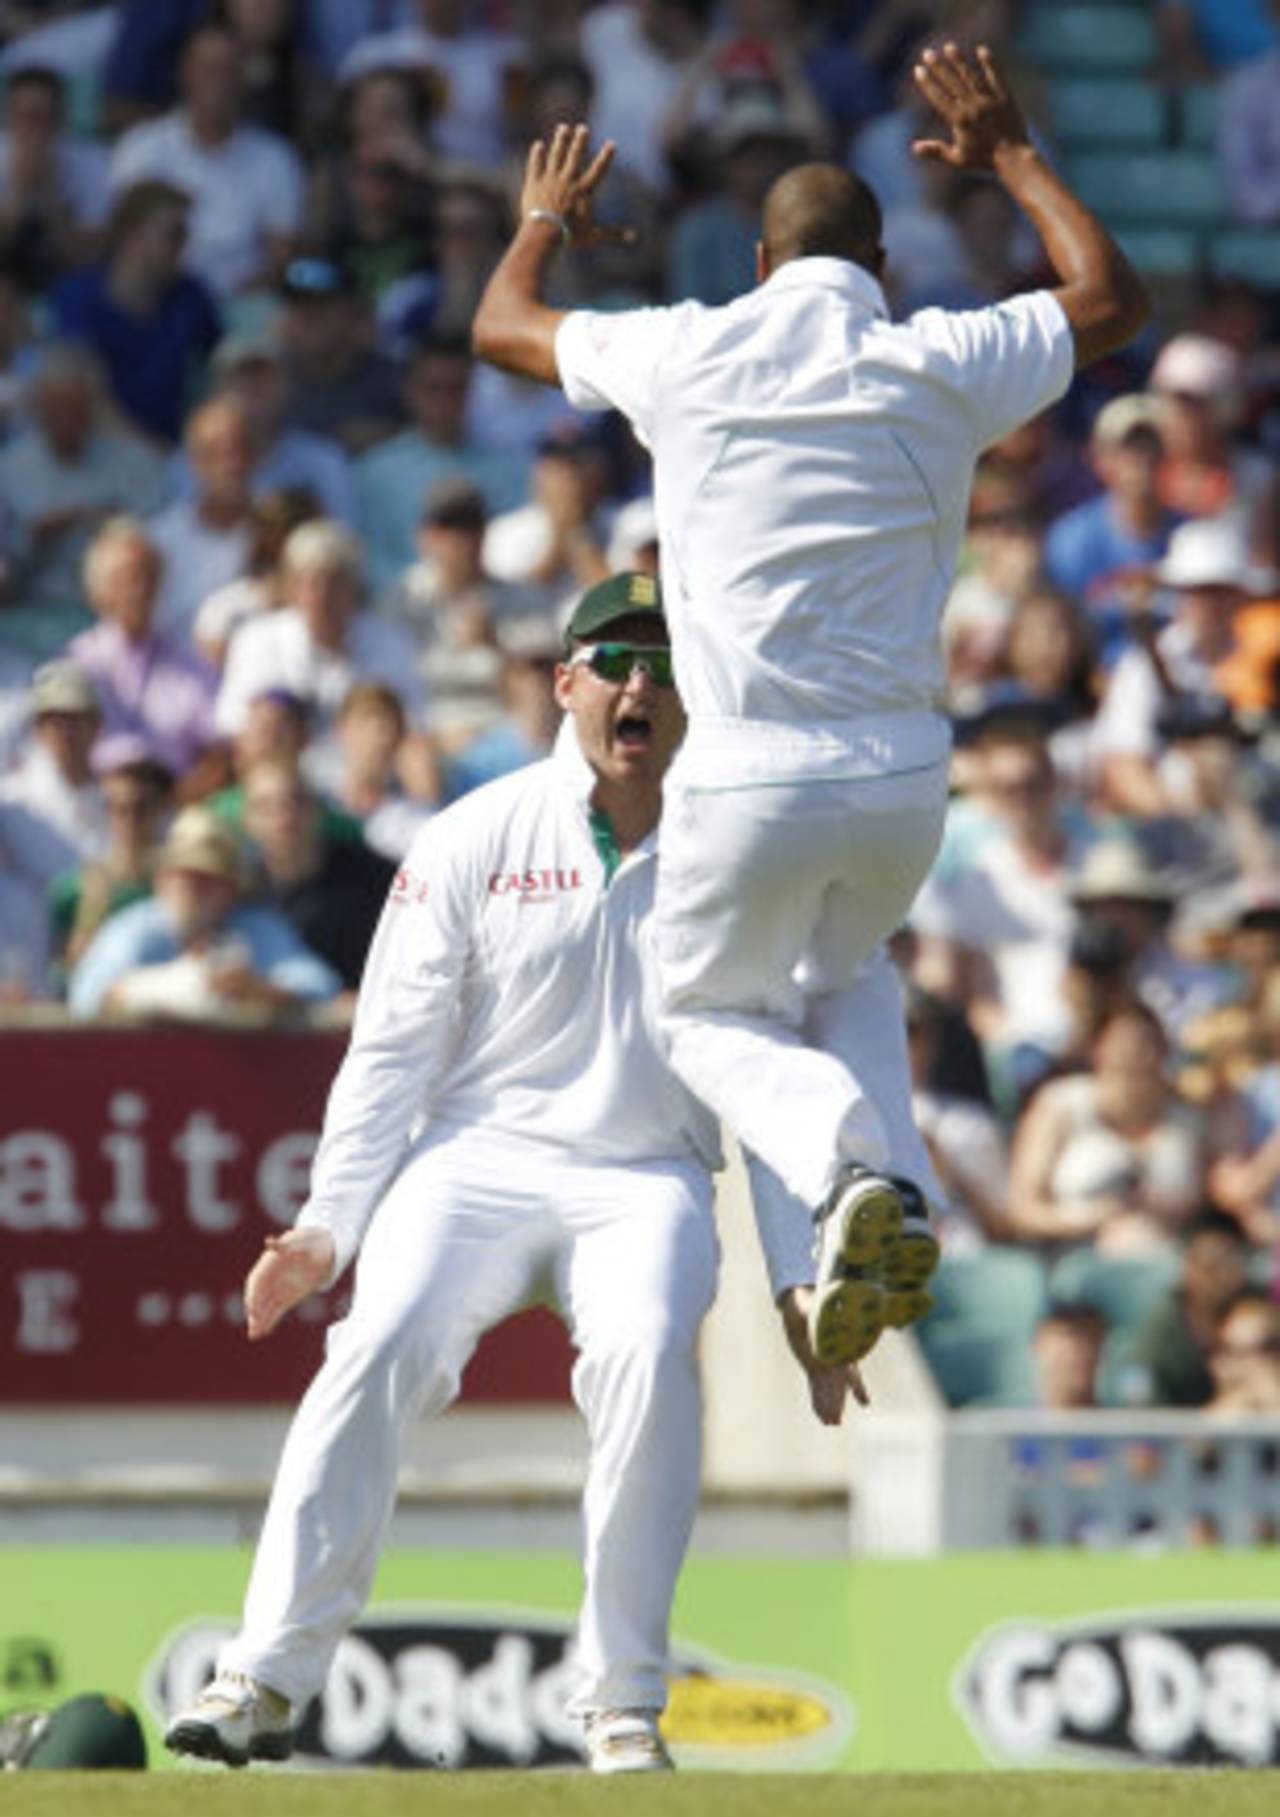 Vernon Philander leaps at dismissing Alastair Cook, England v South Africa, 1st Investec Test, The Oval, 4th day, July, 22, 2012